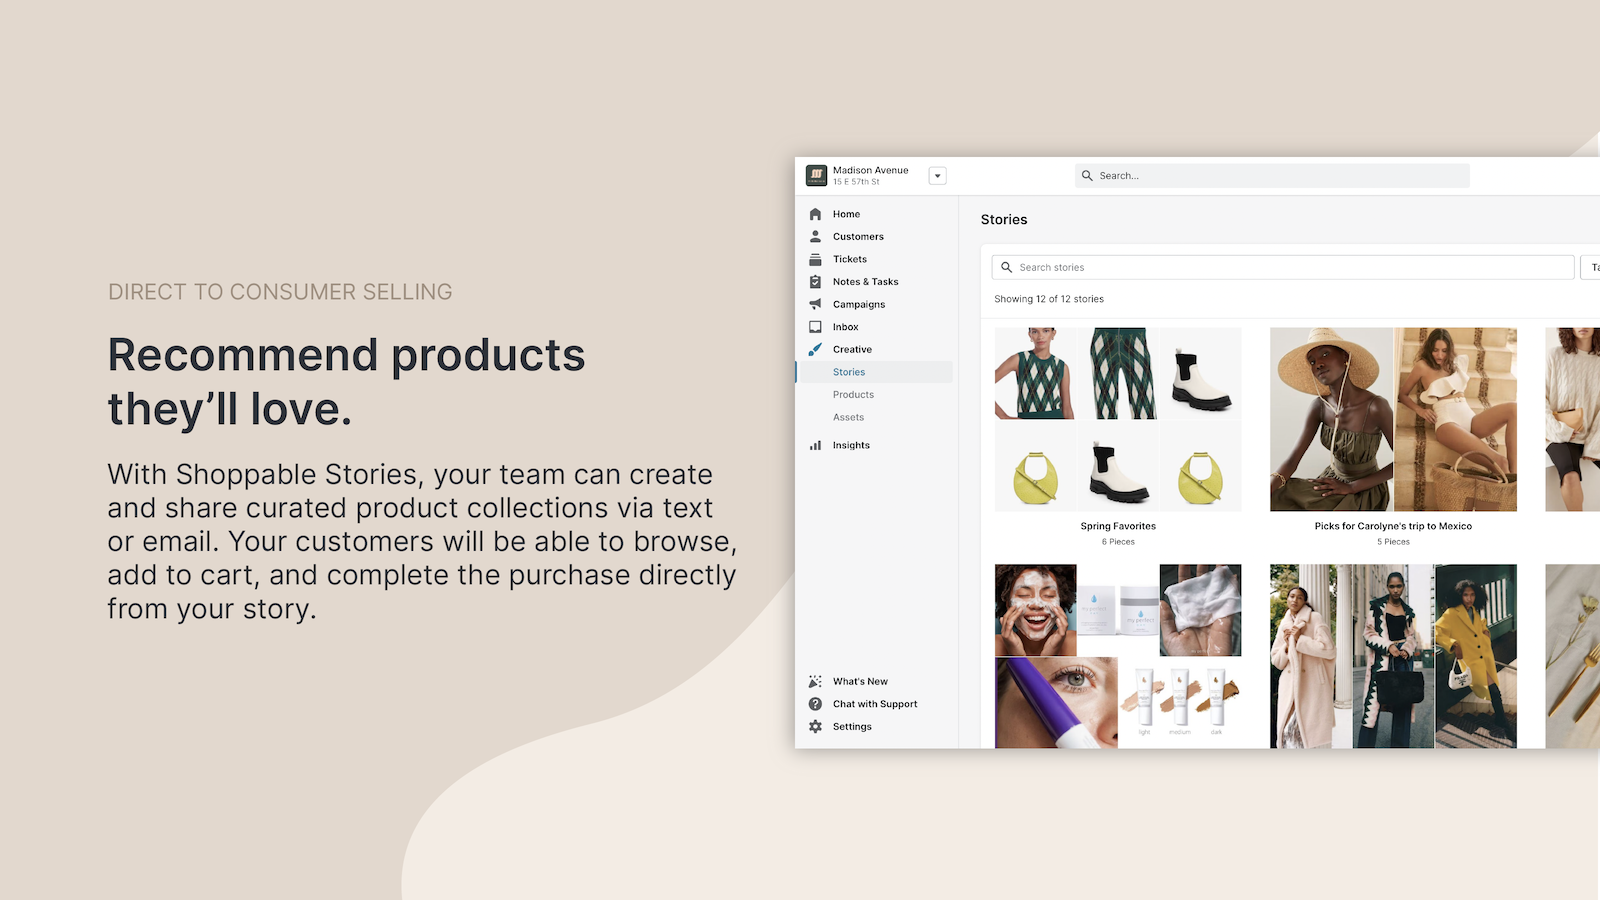 Curate and share product recommendations over email and text.